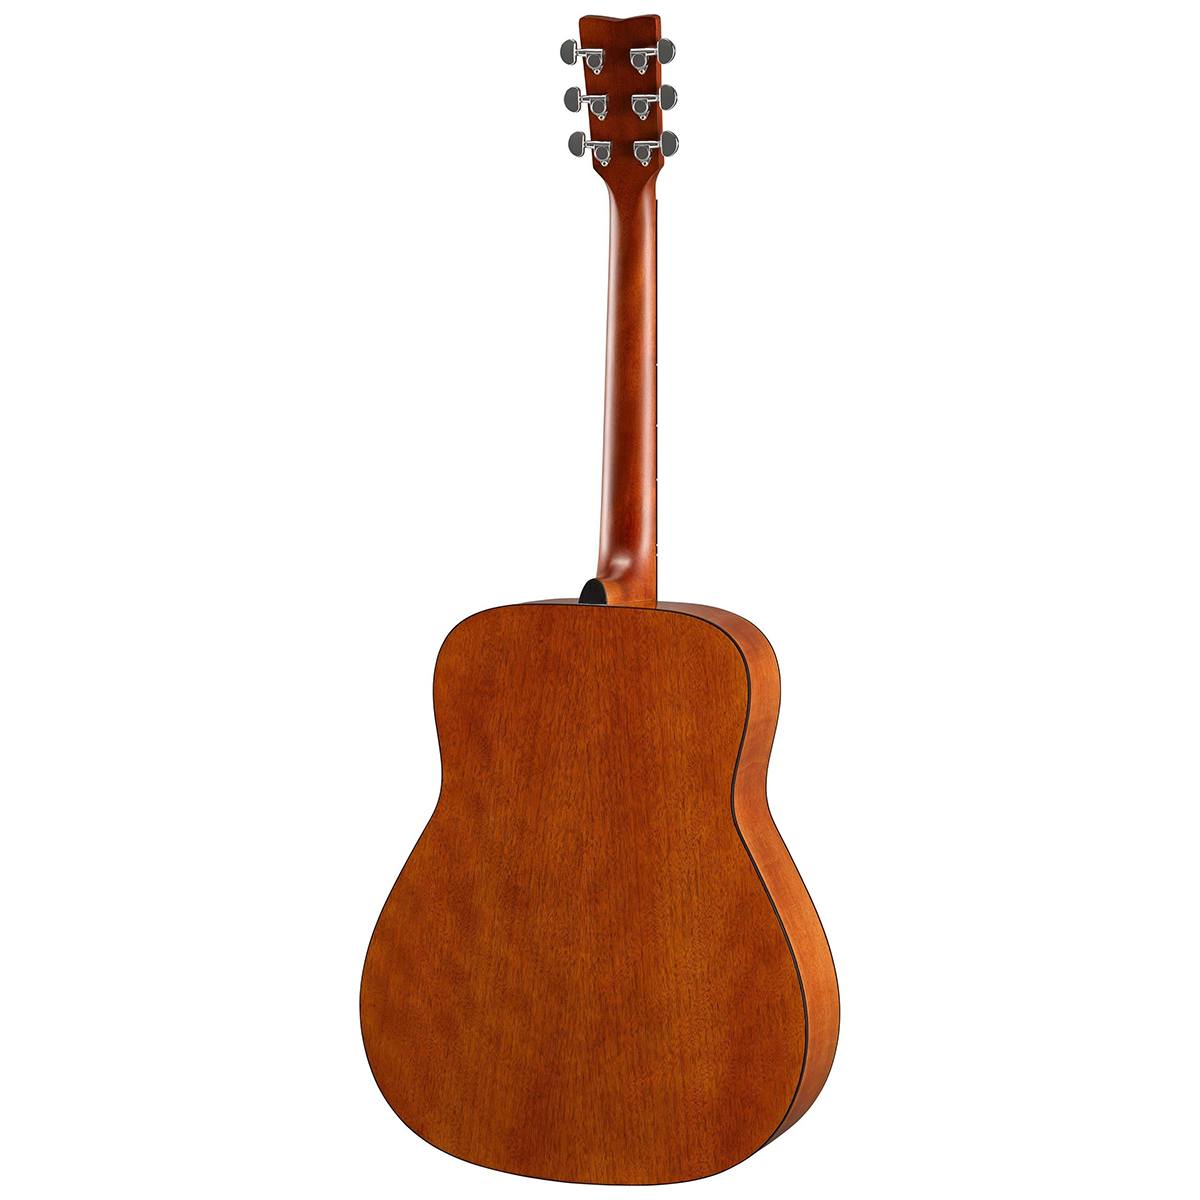 Yamaha FG Series FG800 Acoustic Guitar Dreadnought Top Solid Spruce Back Nato, Okoume - image 4 of 4